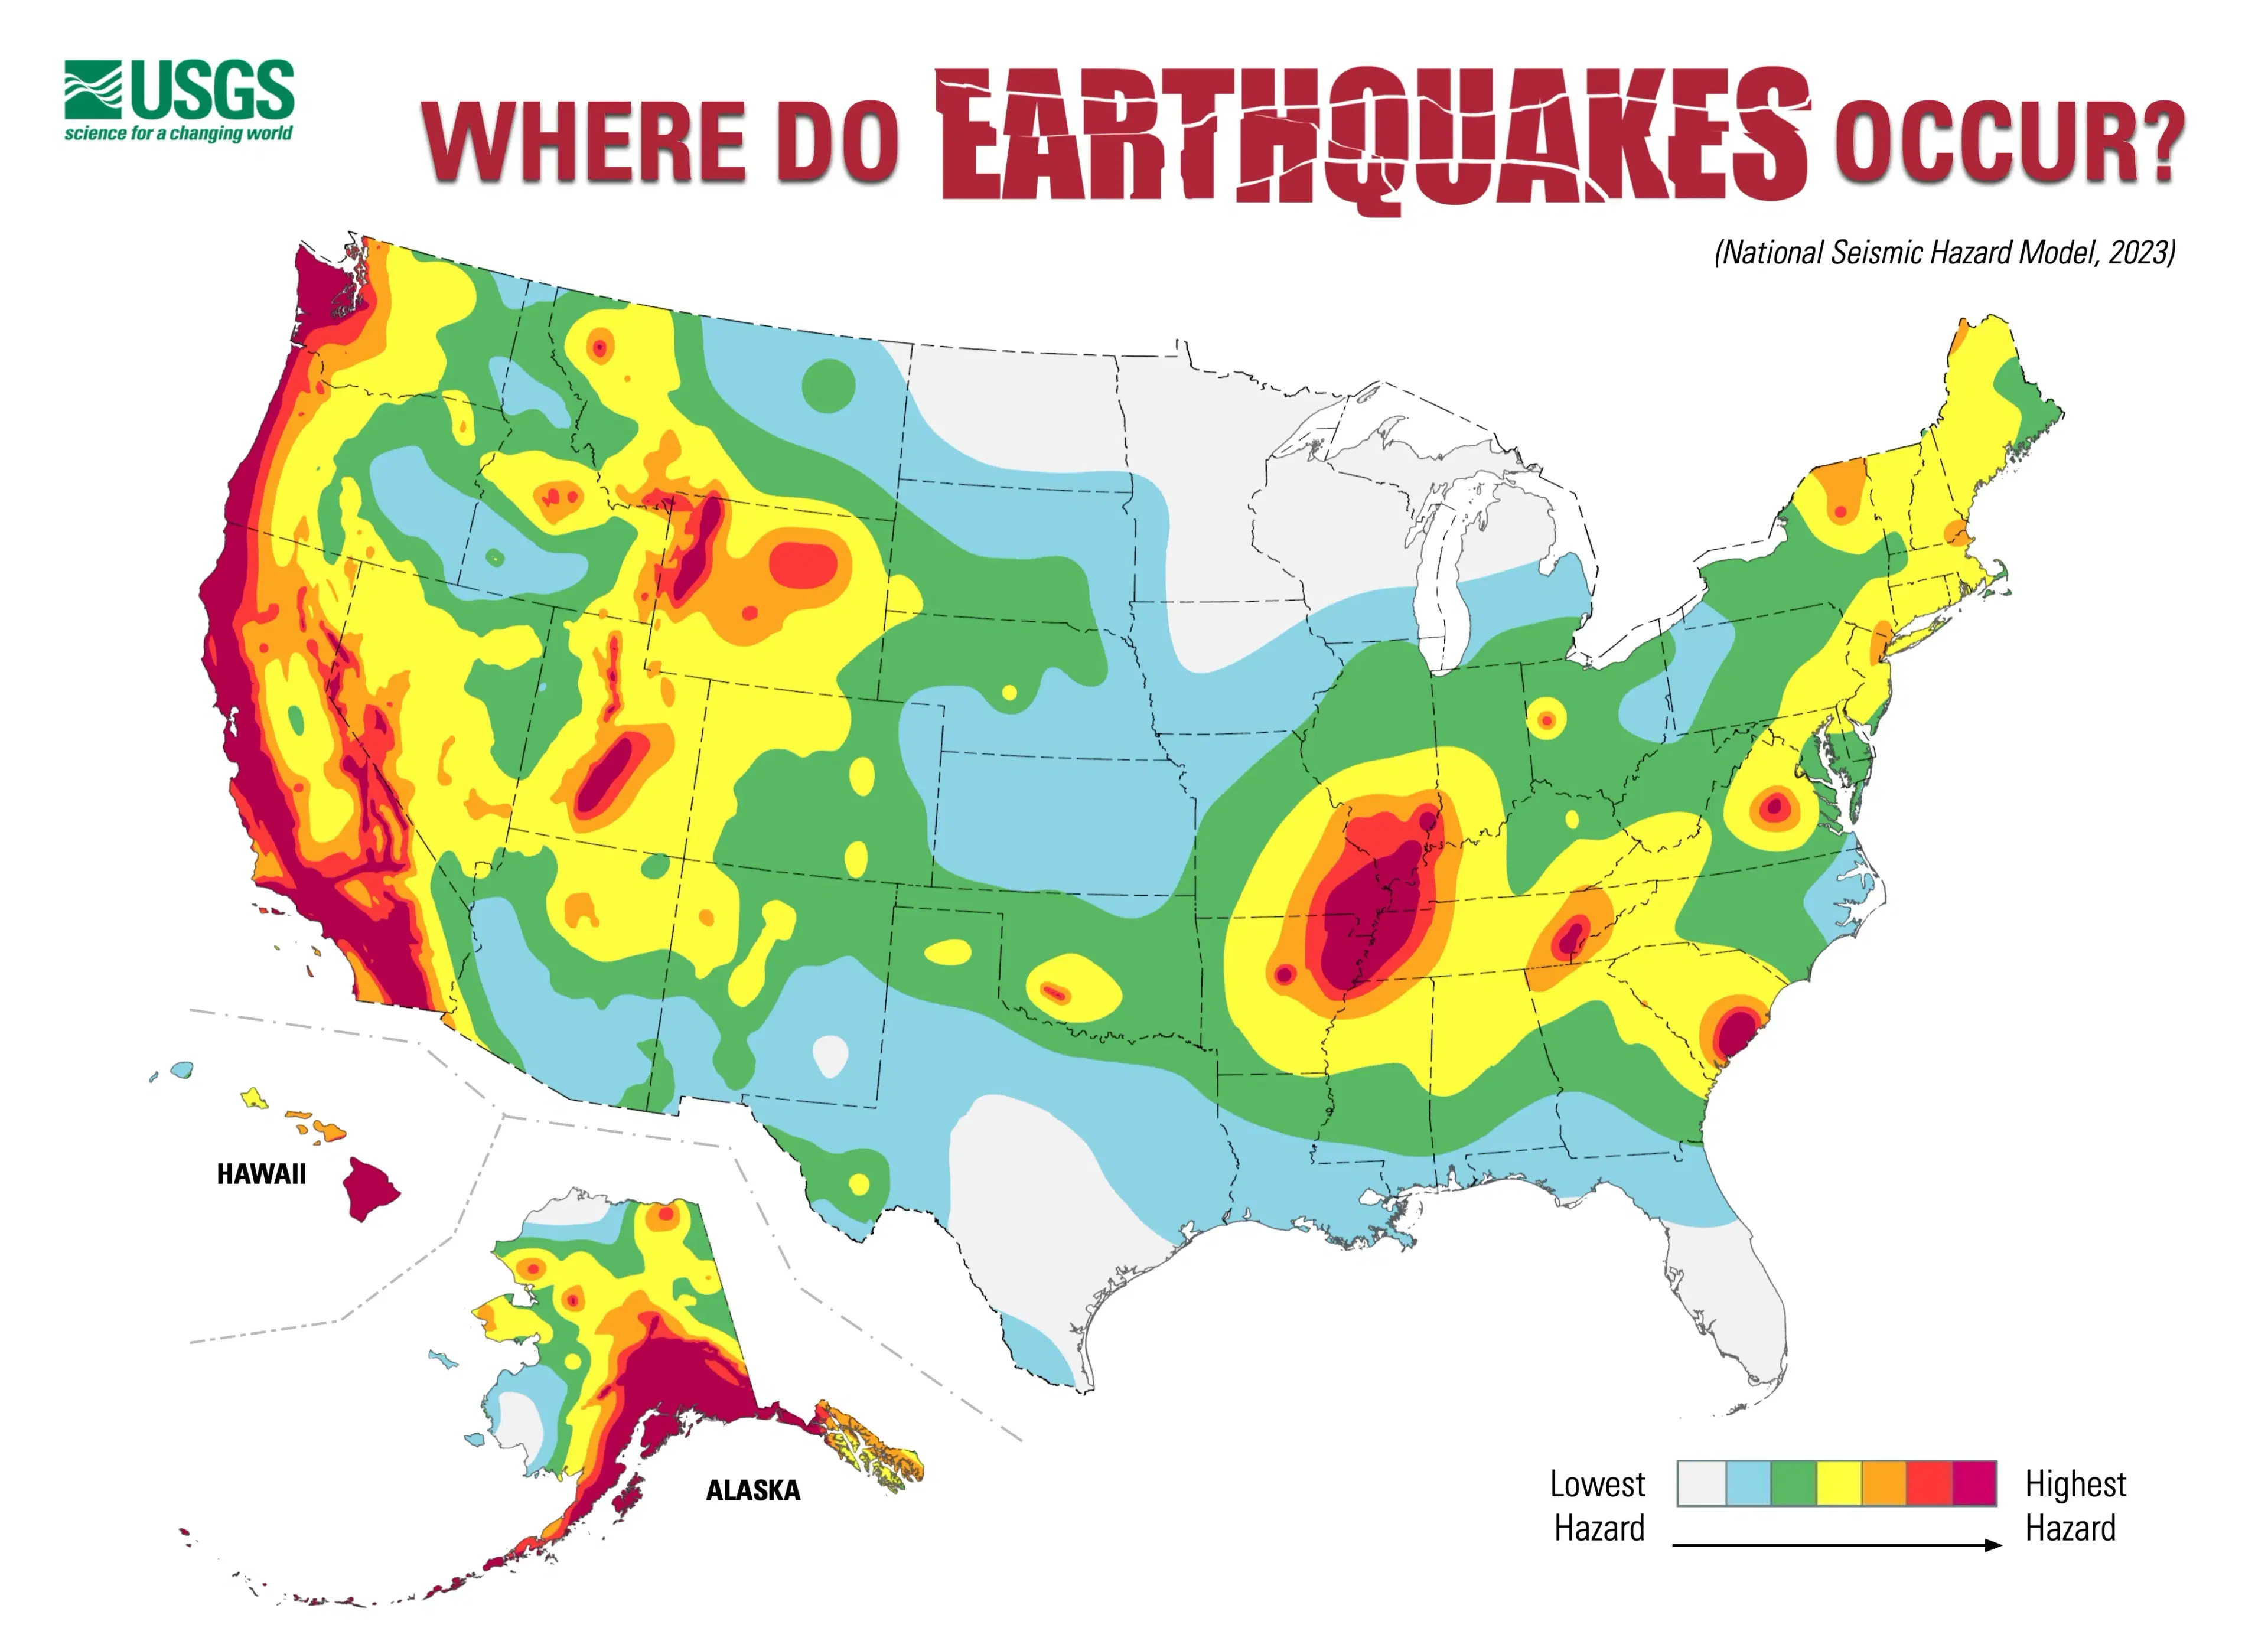 Where do Earthquakes Occur in the U.S.?